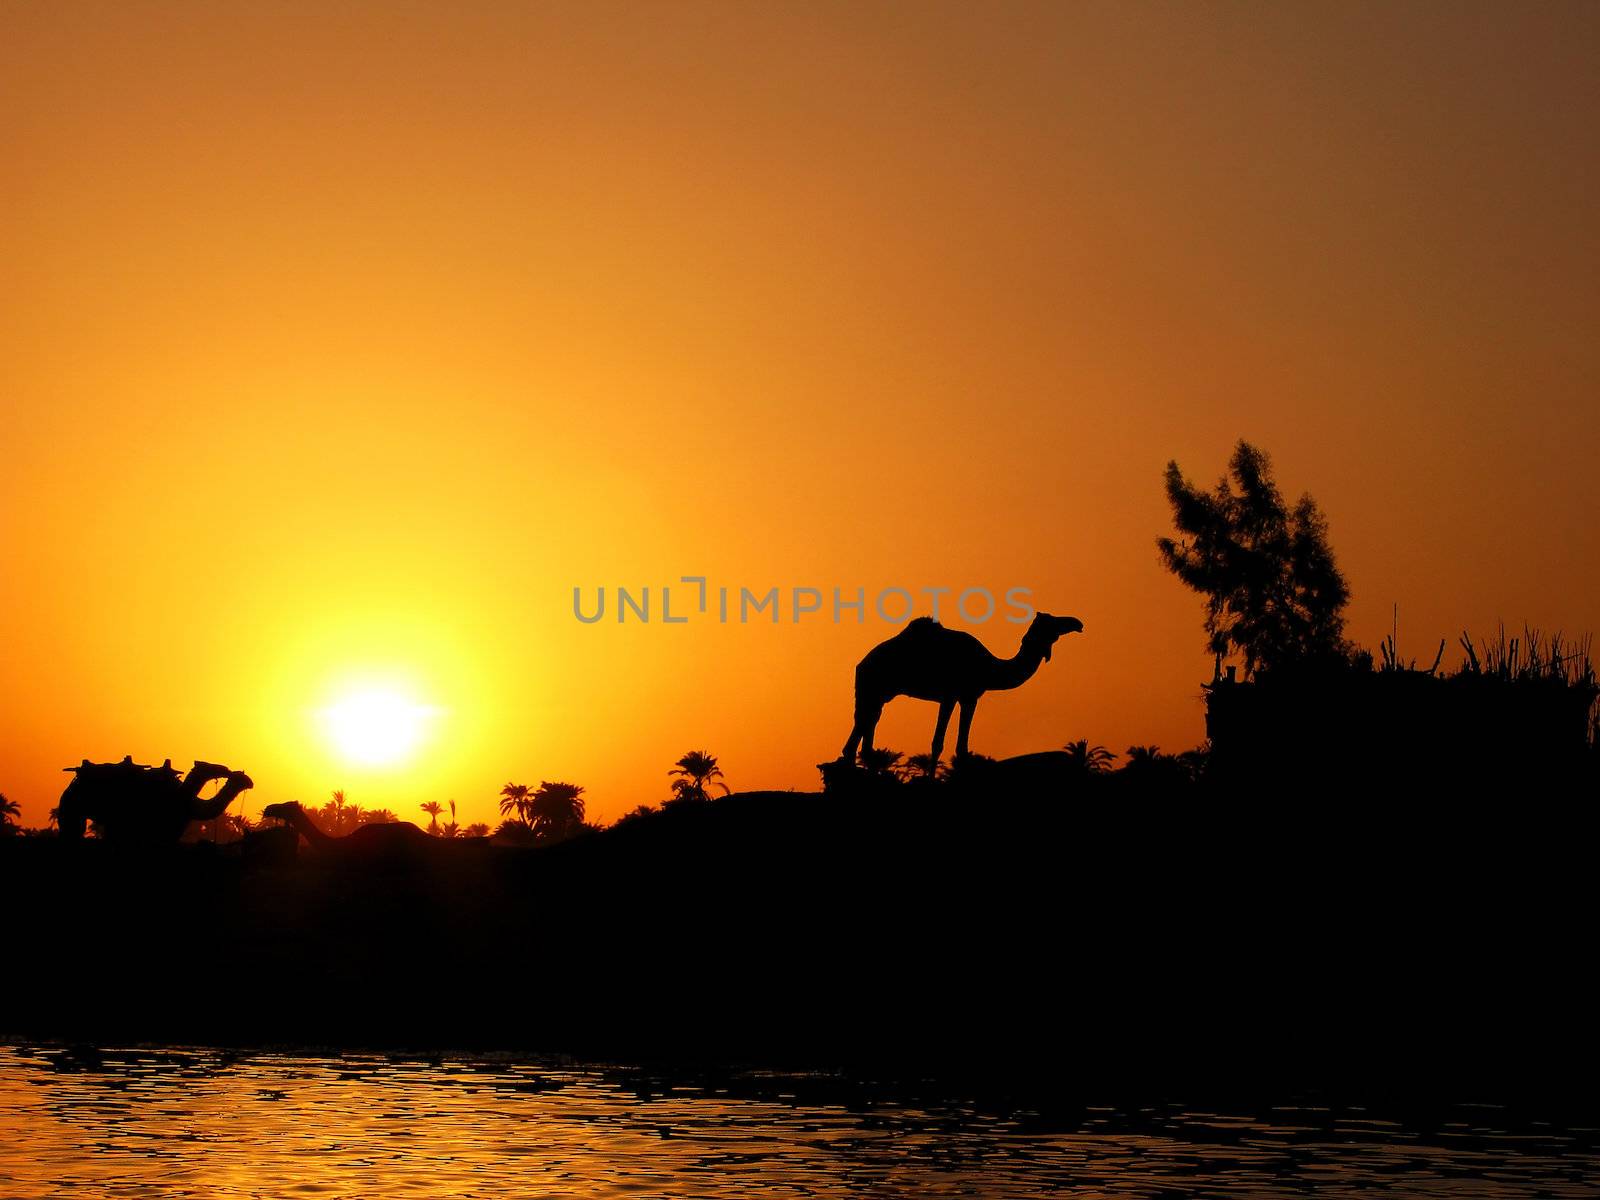 Camel silhouette against sunset on Nile by palinchak